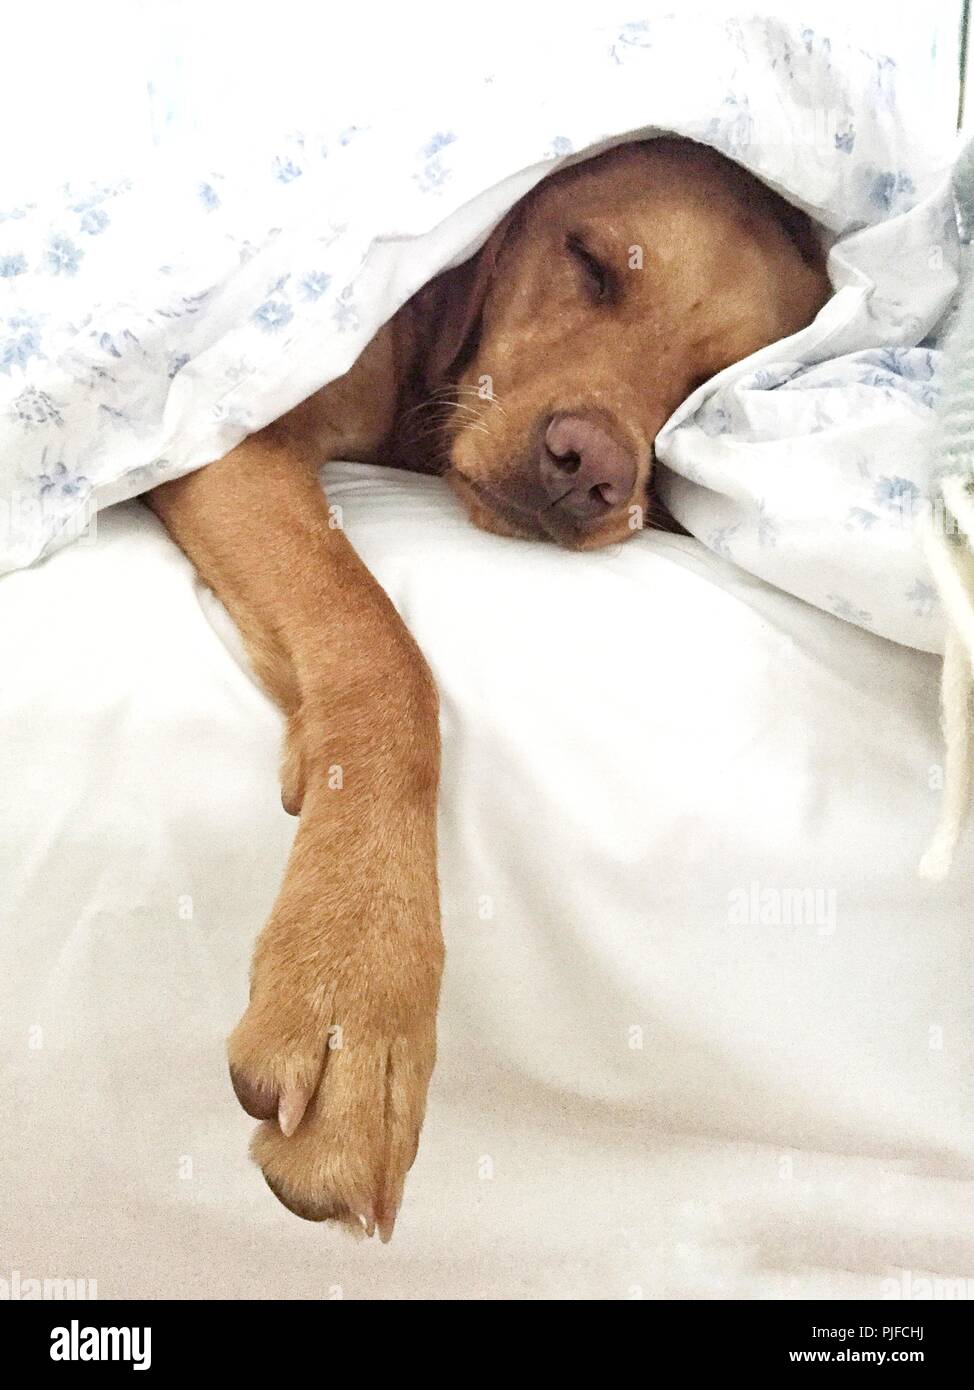 A sleeping yellow Labrador retriever dog under clean white sheets and duvet in a pampered pet image. Stock Photo